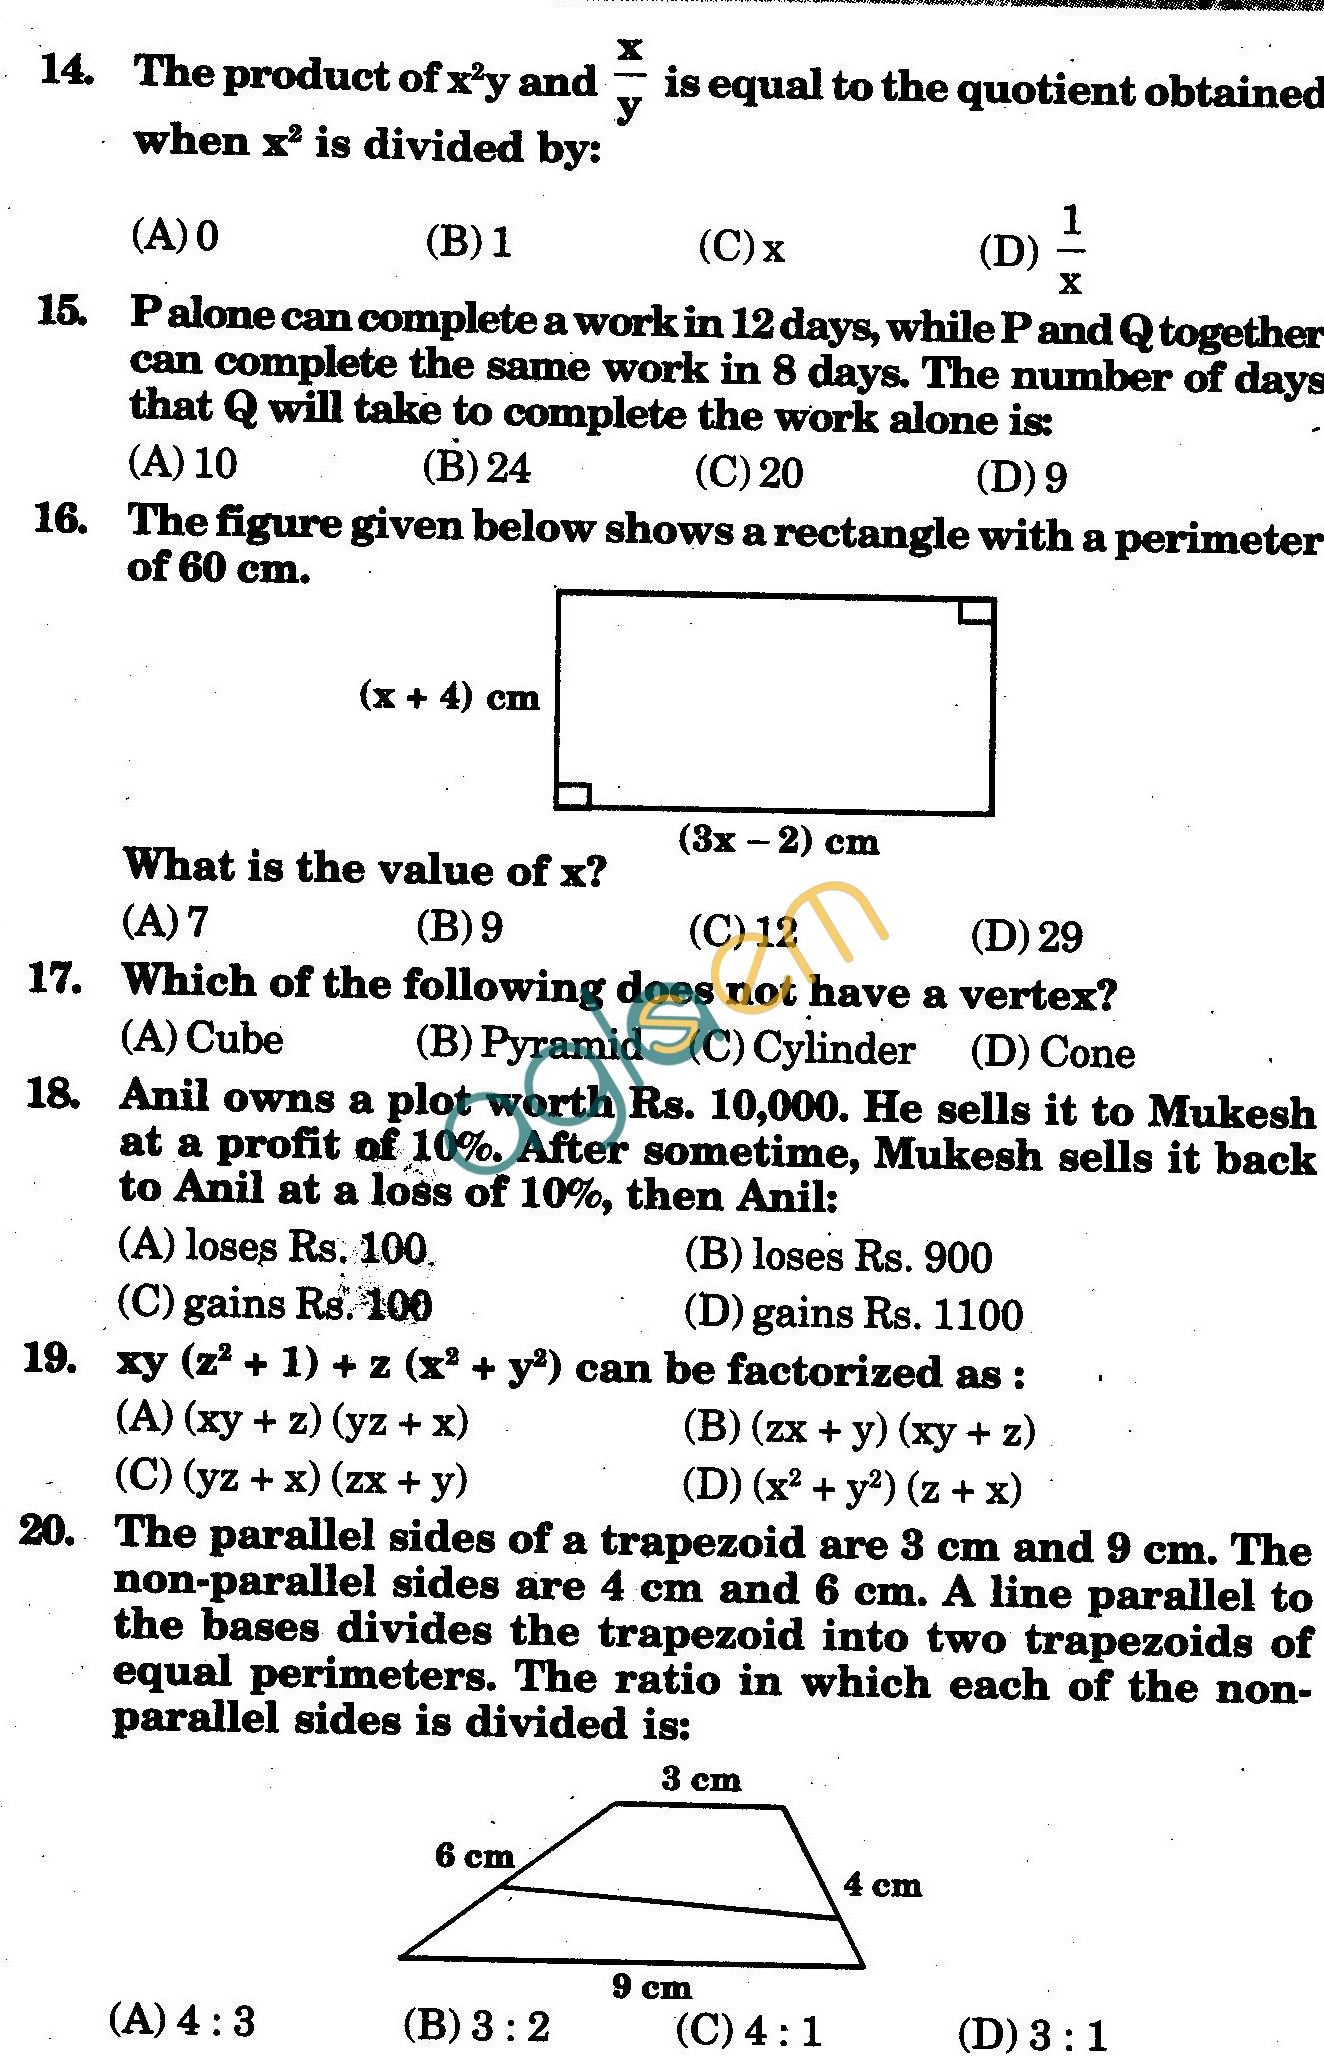 NSTSE 2010: Class VIII Question Paper with Answers - Mathematics